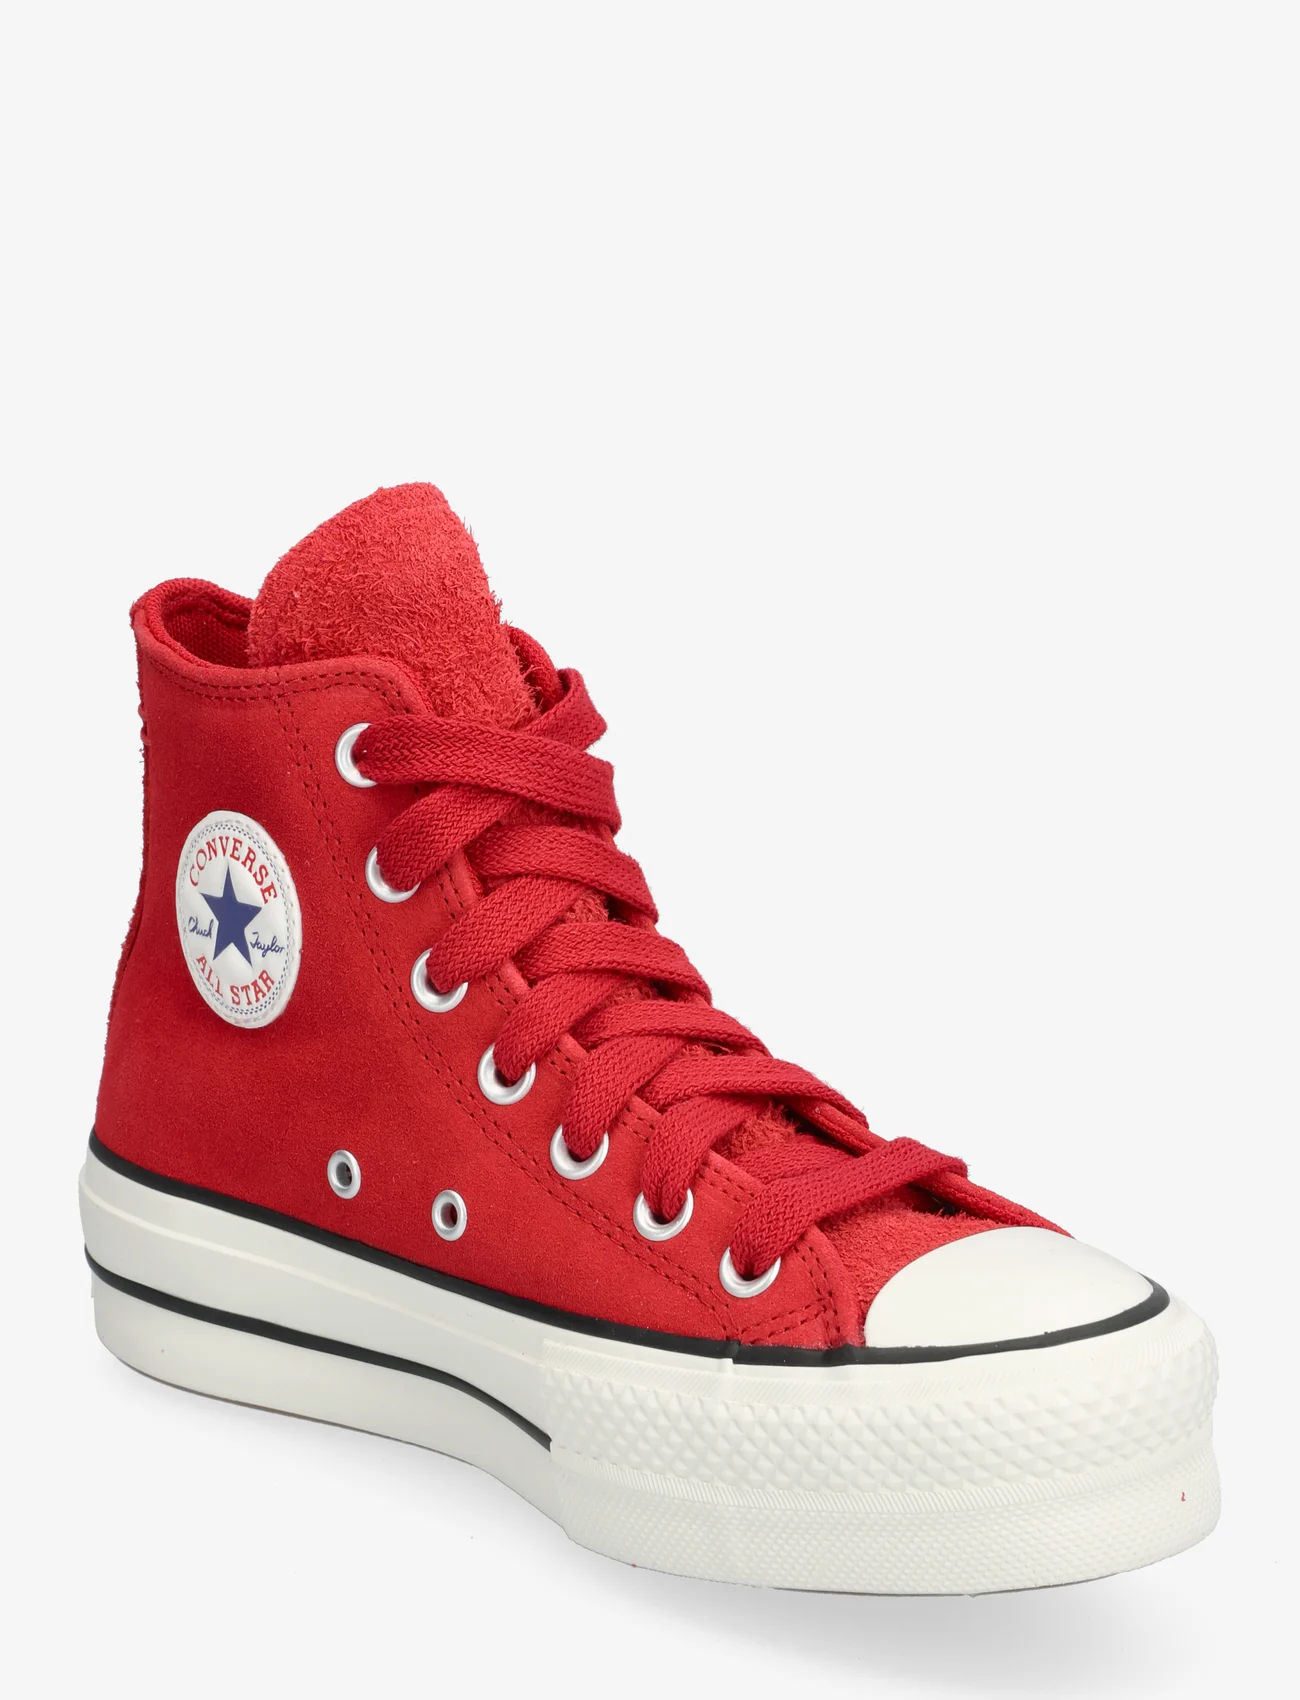 Converse - Chuck Taylor All Star Lift - baskets montantes - gym red/egret/black - 0